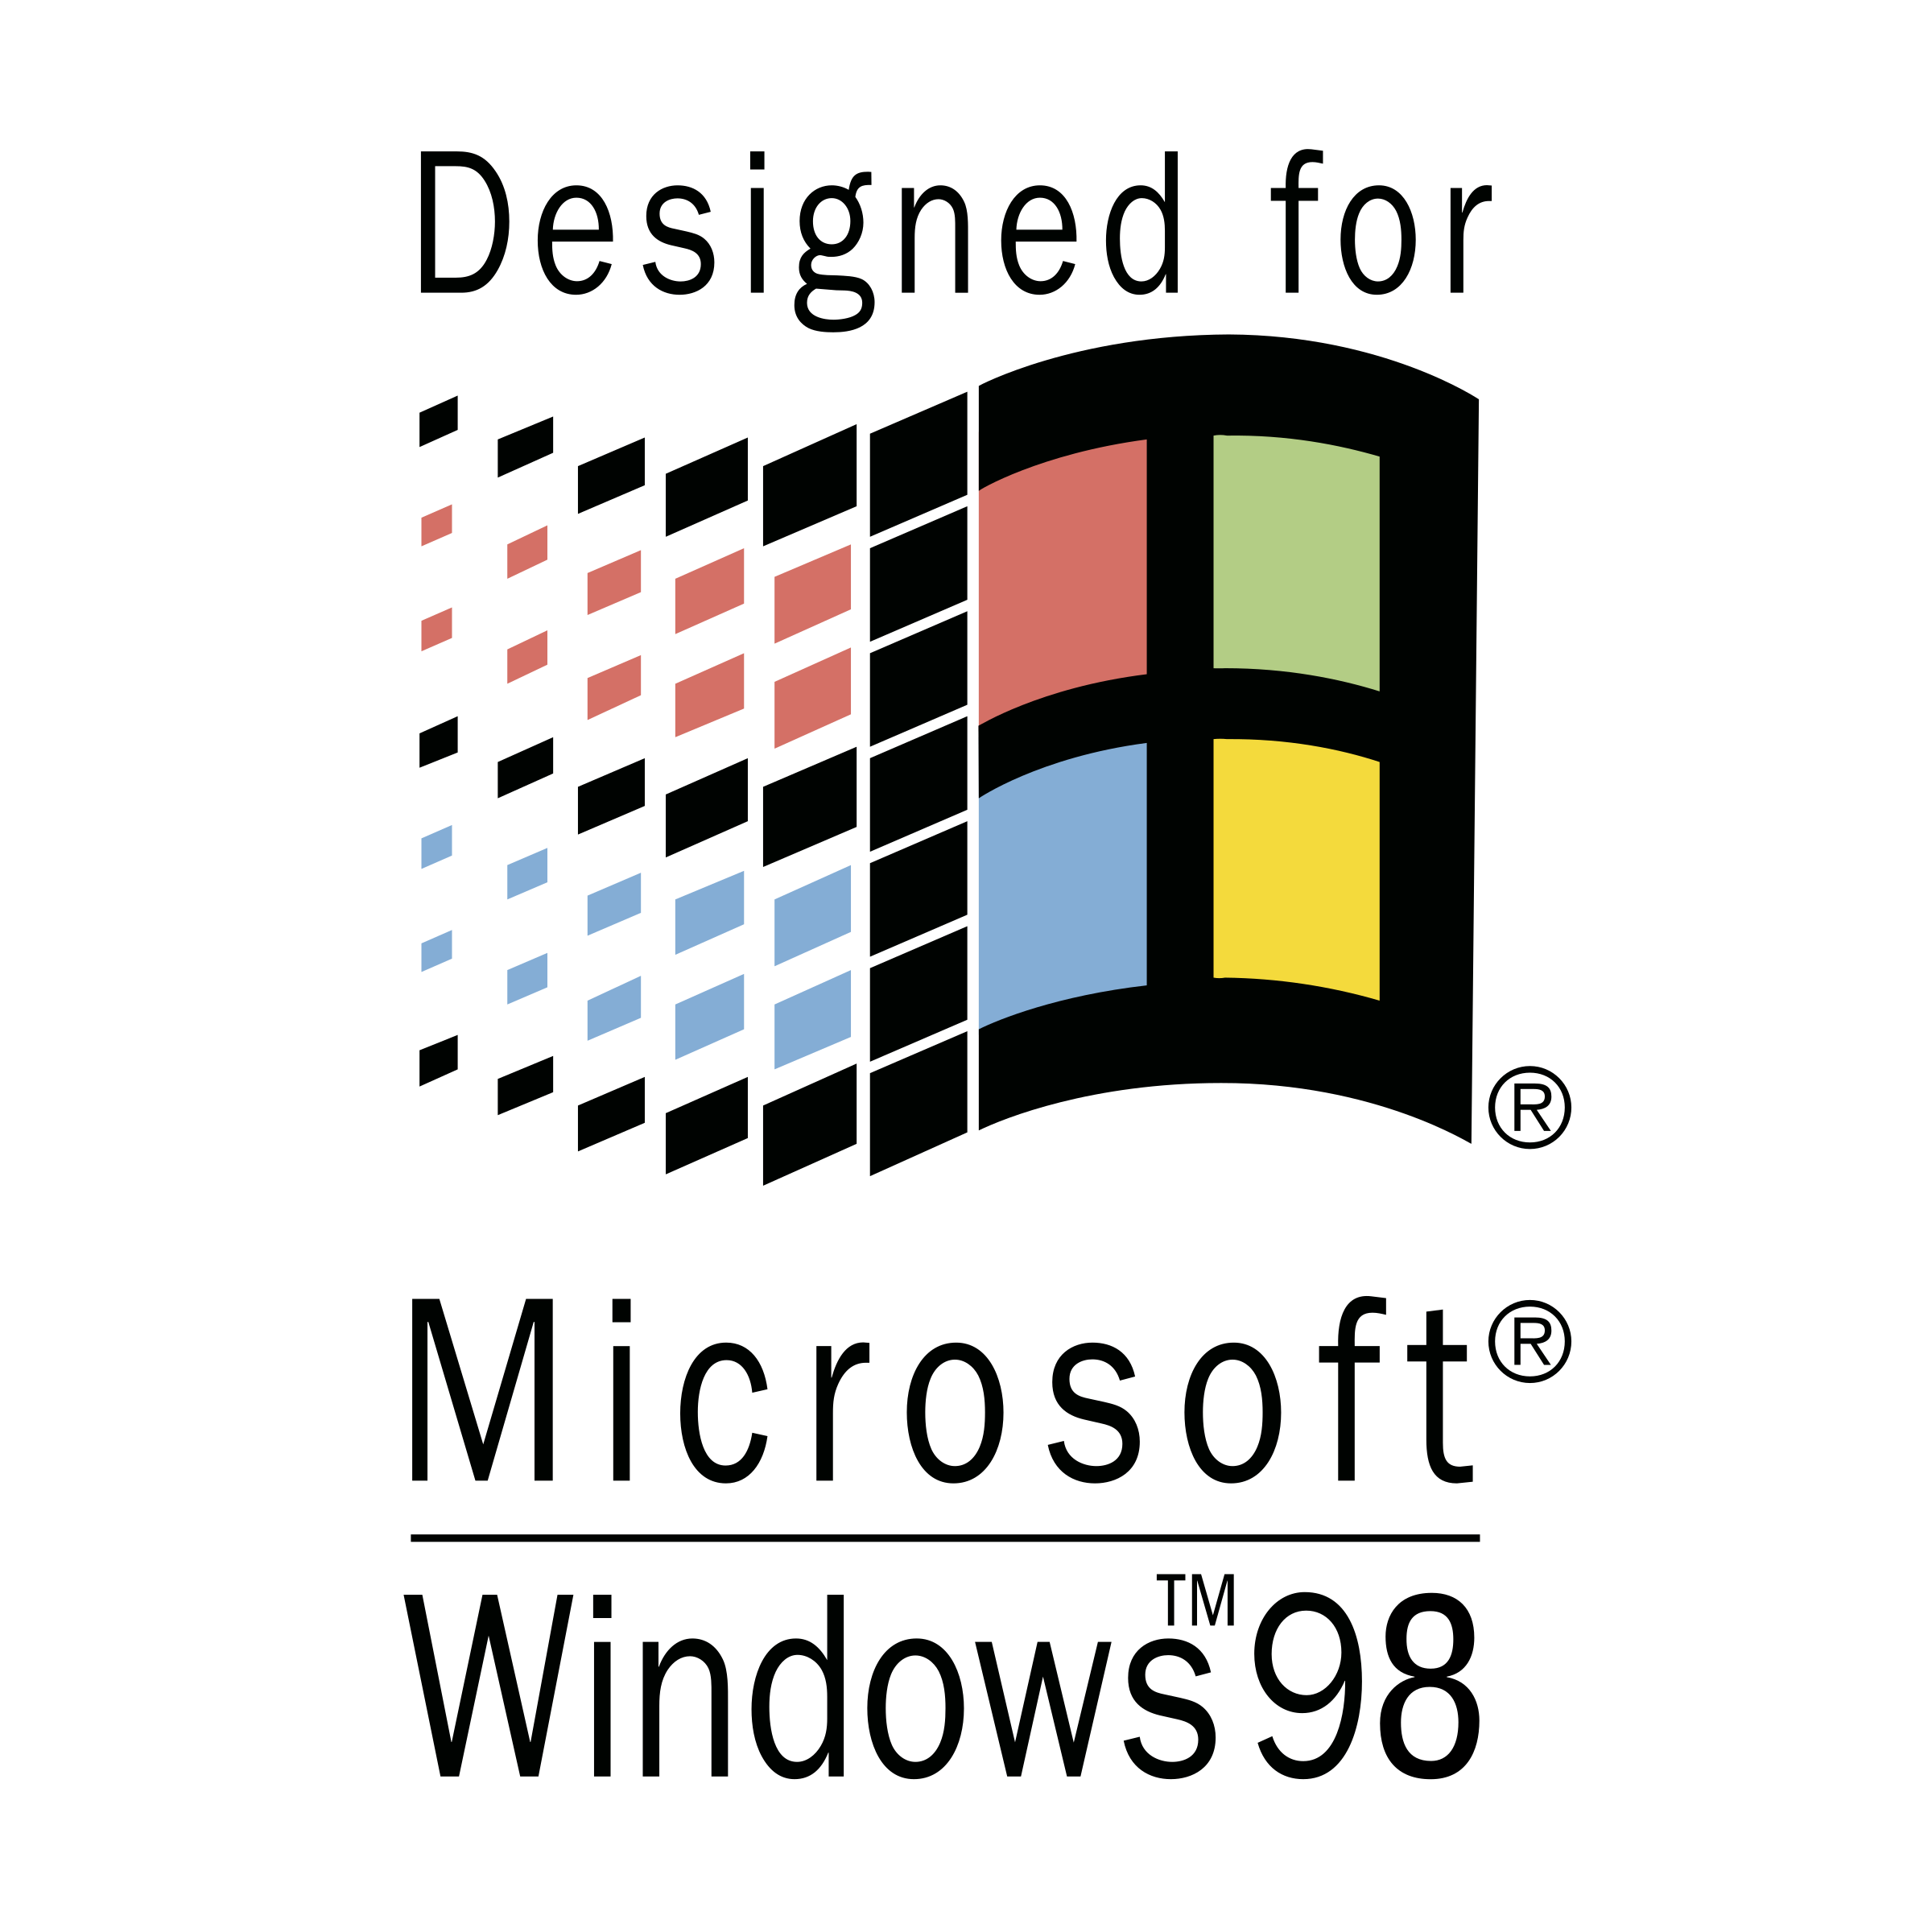 Designed for logo png. Microsoft clipart windows 98